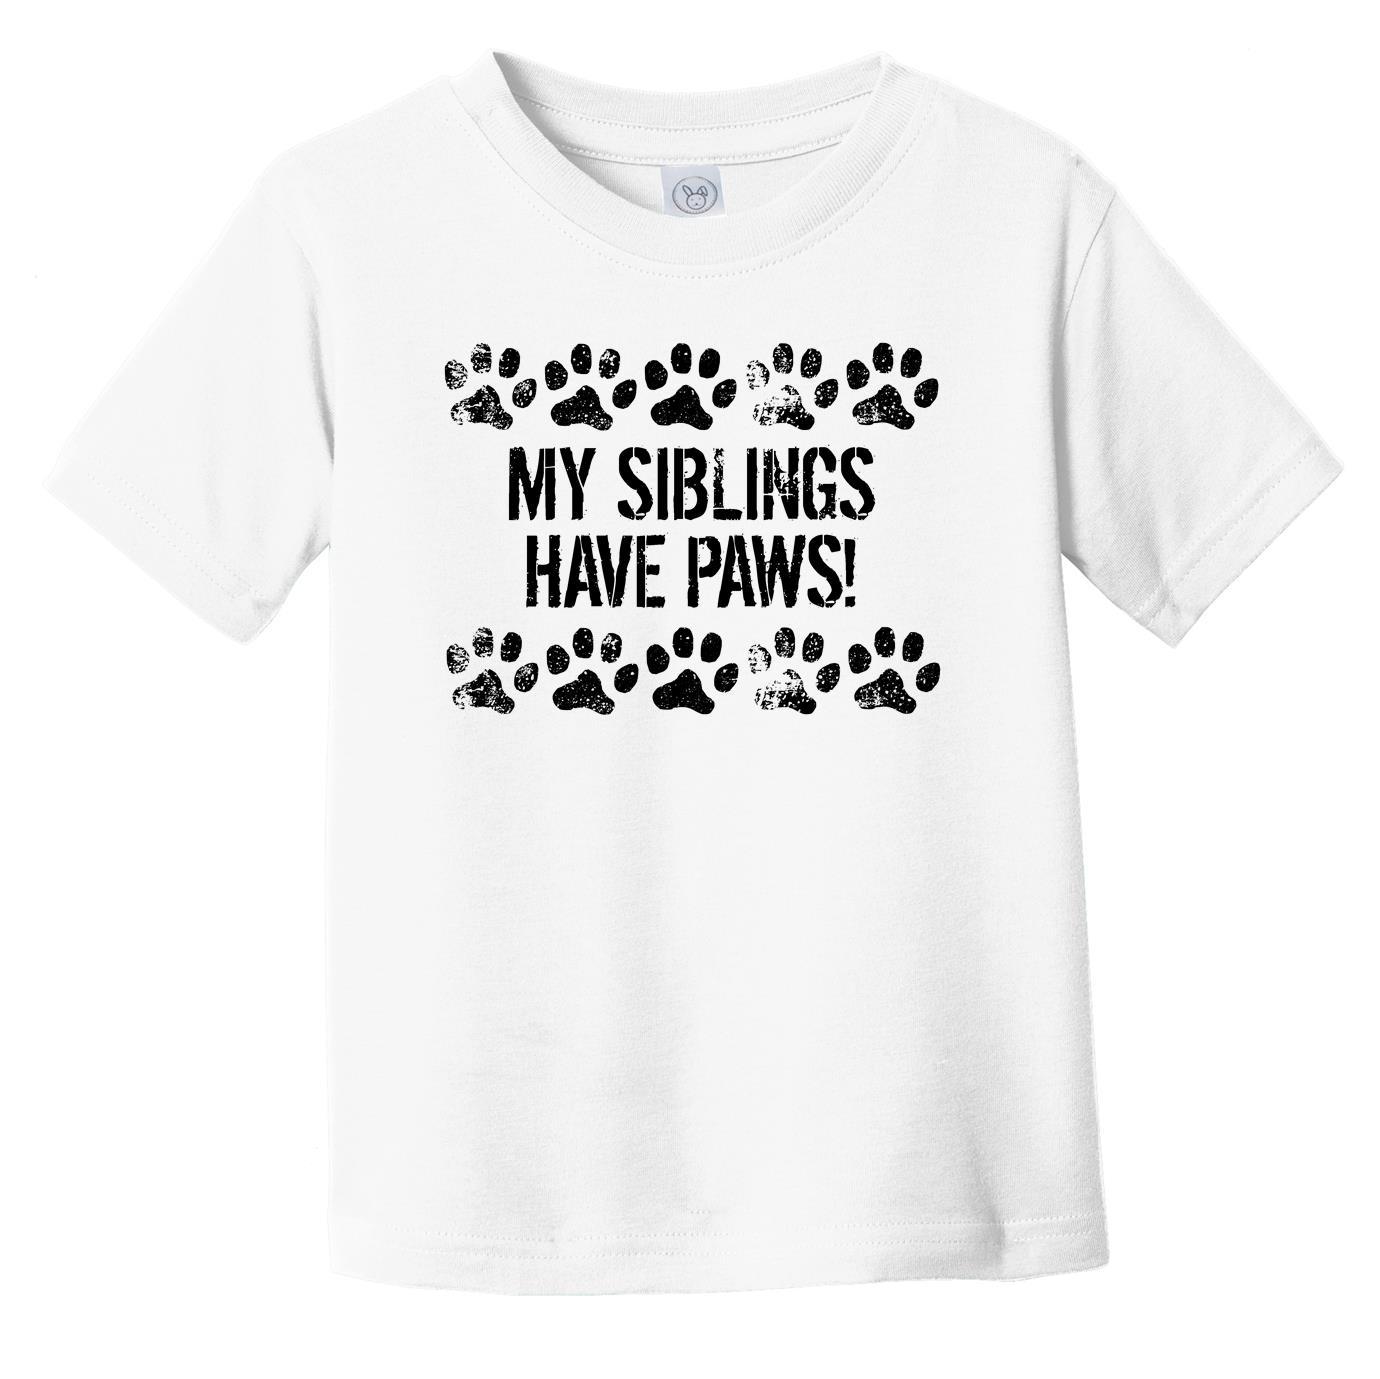 My Siblings Have Paws Funny Infant Toddler T-Shirt - Dog Infant Toddler Shirt For Kids